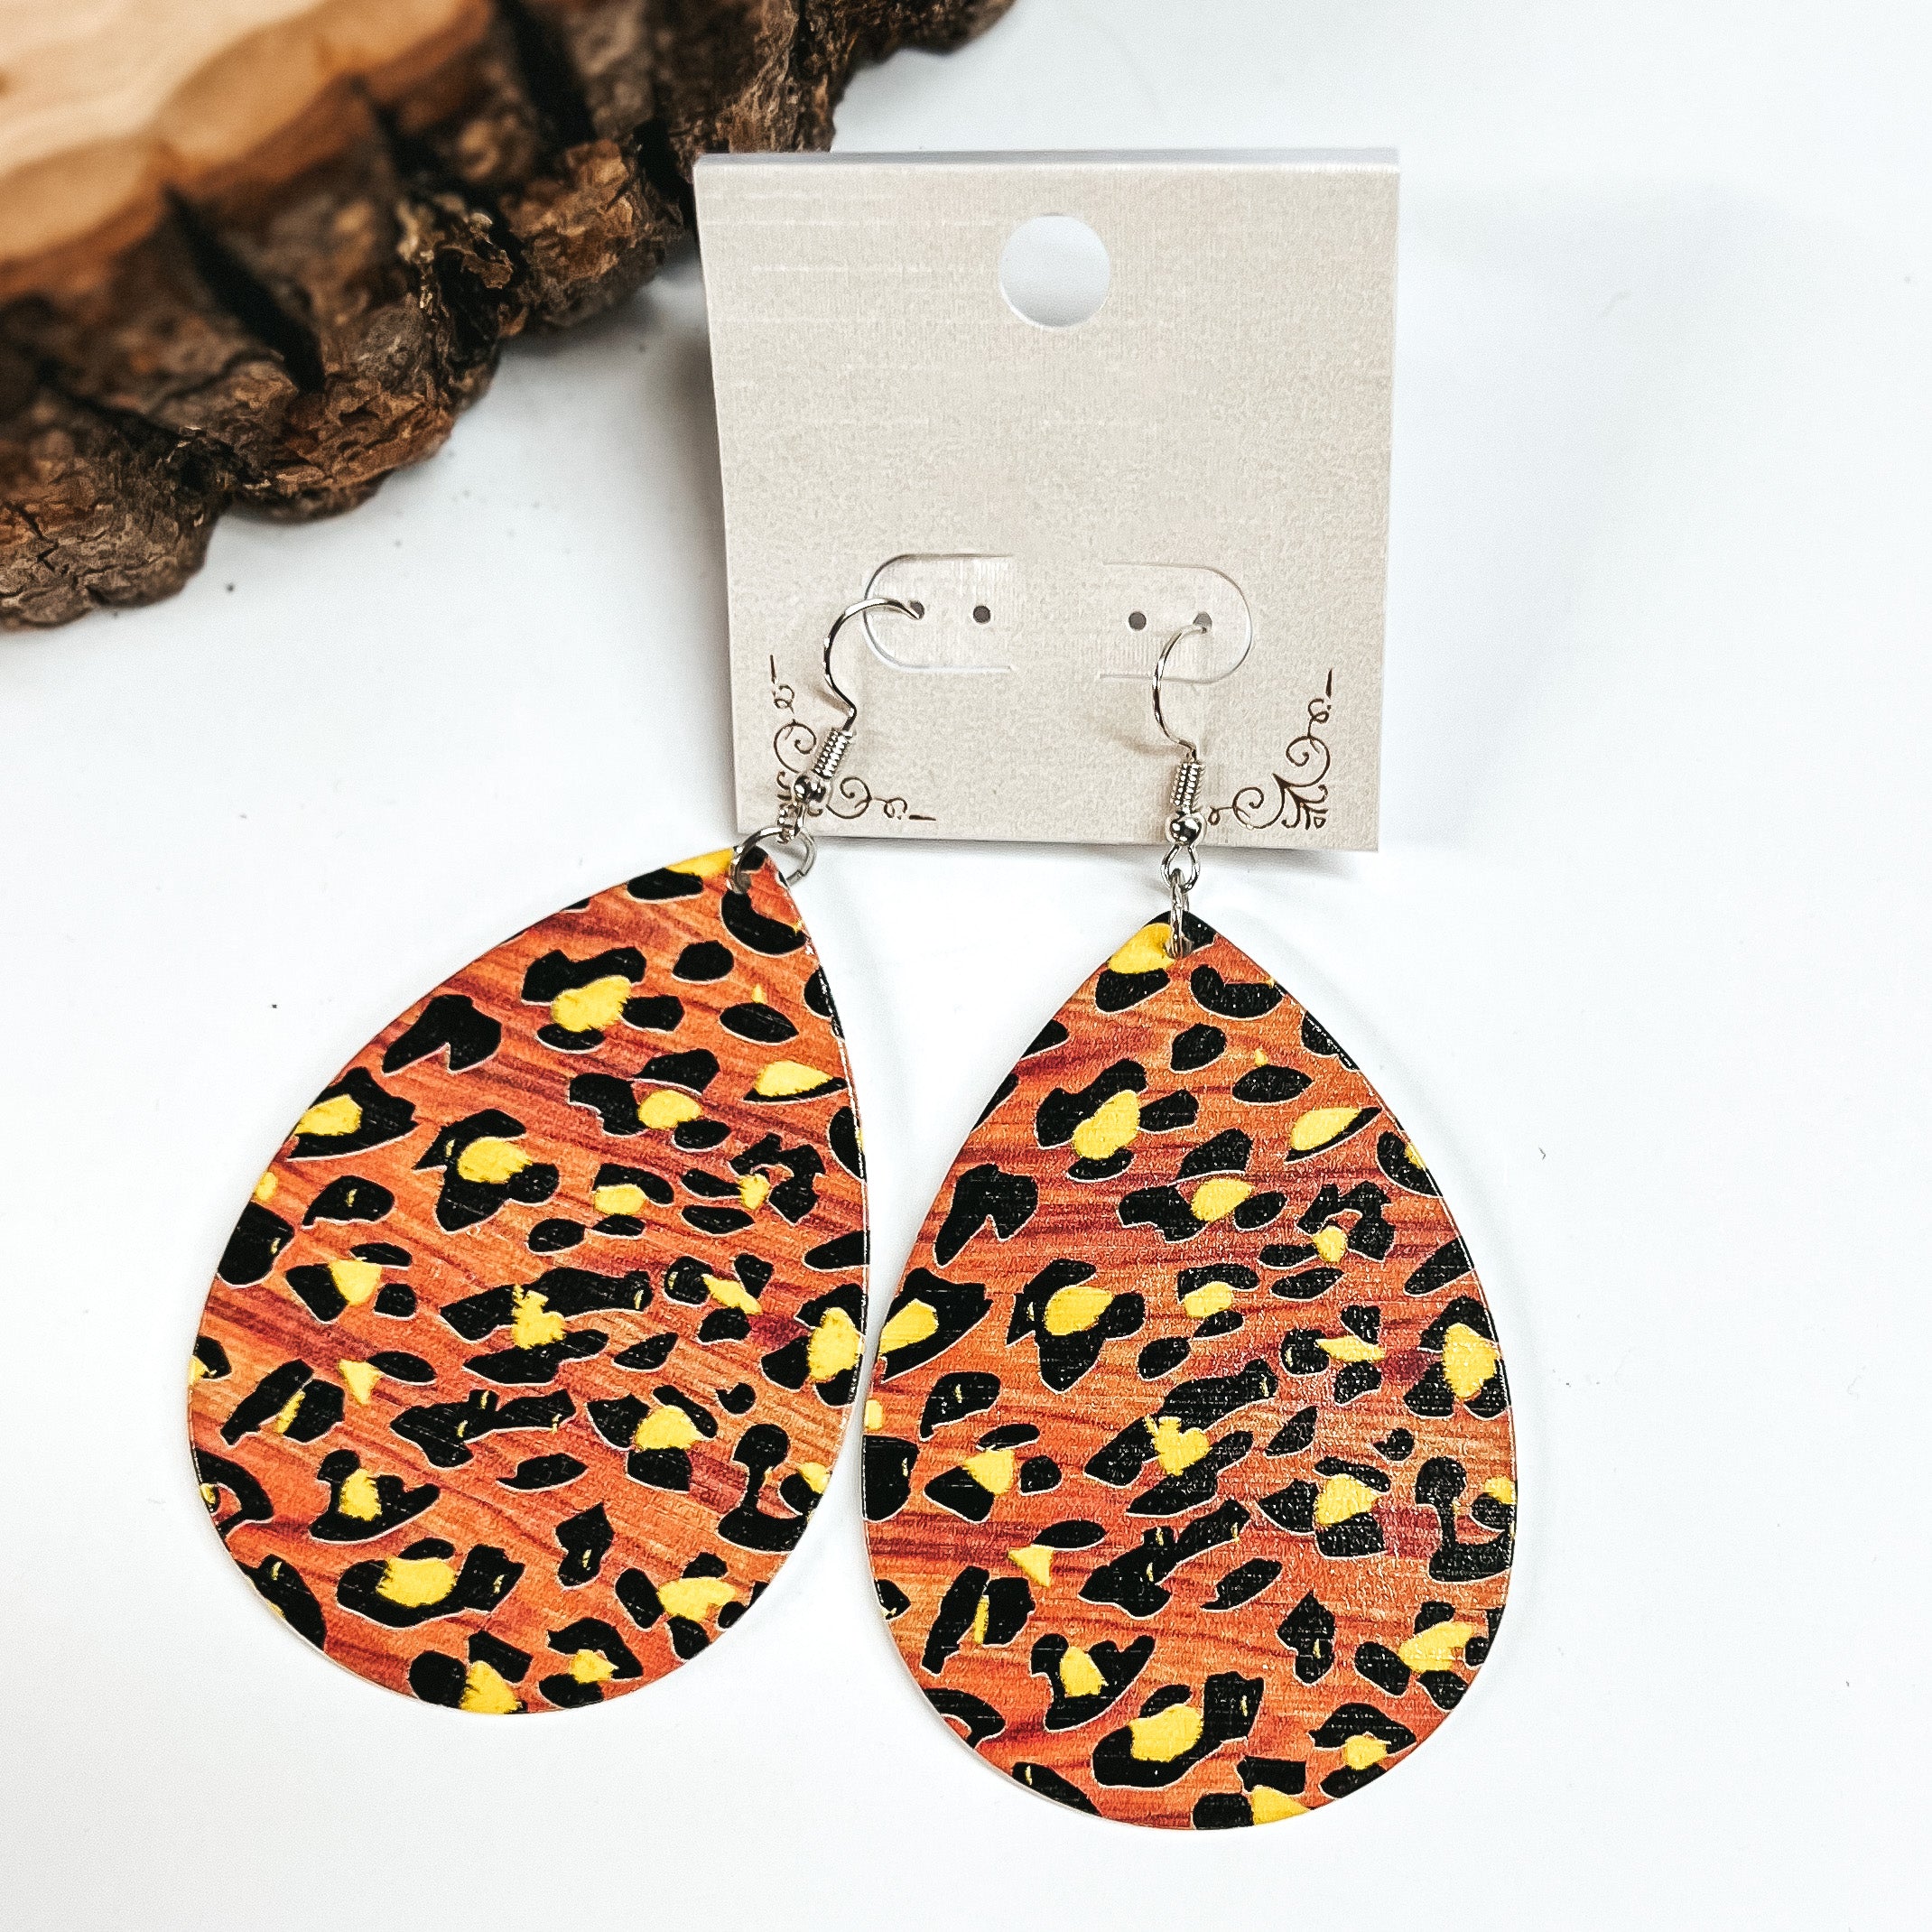 These are brown wooden teardrop earrings in leopard print and yellow detailing. These earrings are placed on a white earring card holder, they are laying on a  white background with a slab of wood in the back as decor.